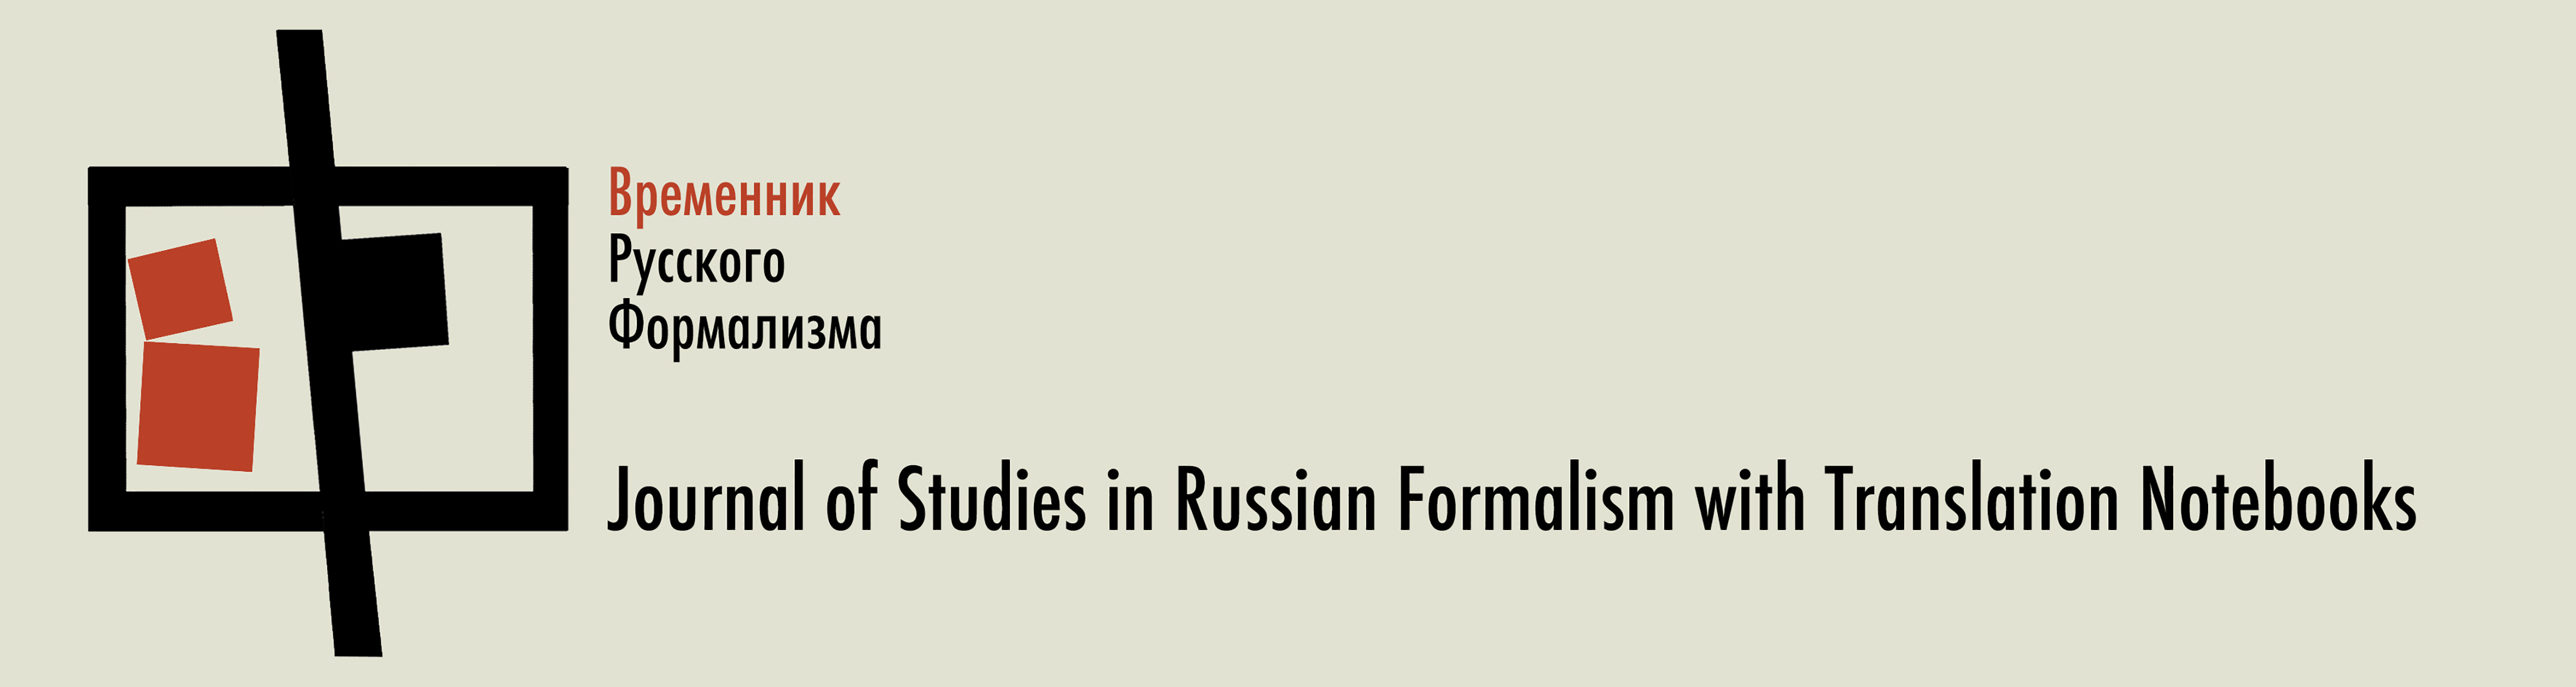 Journal of Studies in Russian Formalism with Translation Notebooks logo